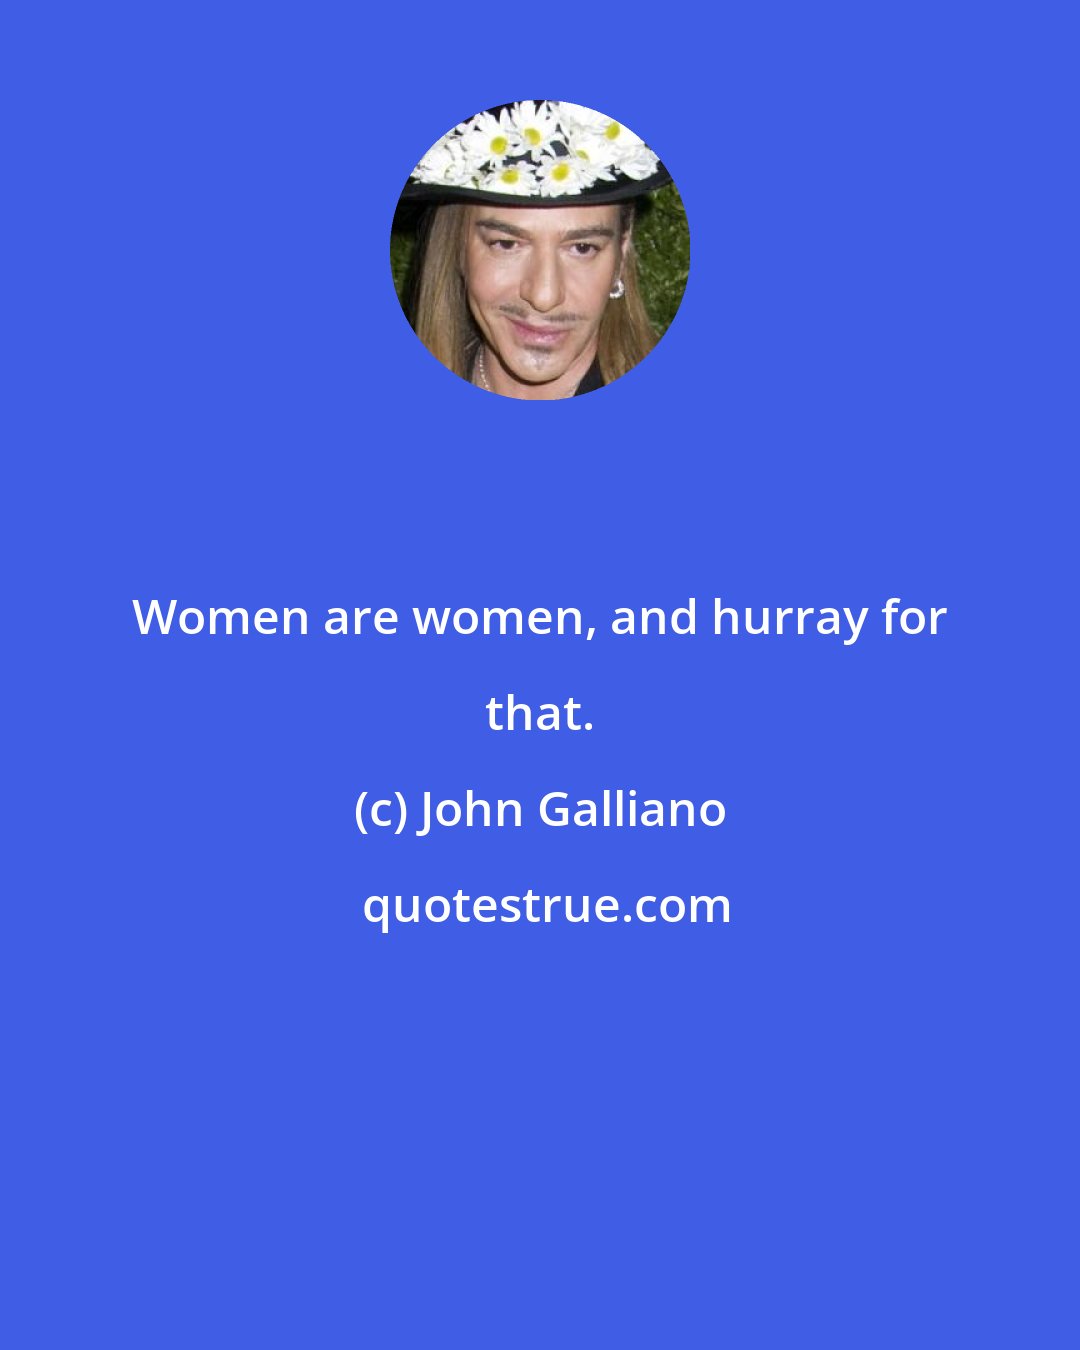 John Galliano: Women are women, and hurray for that.